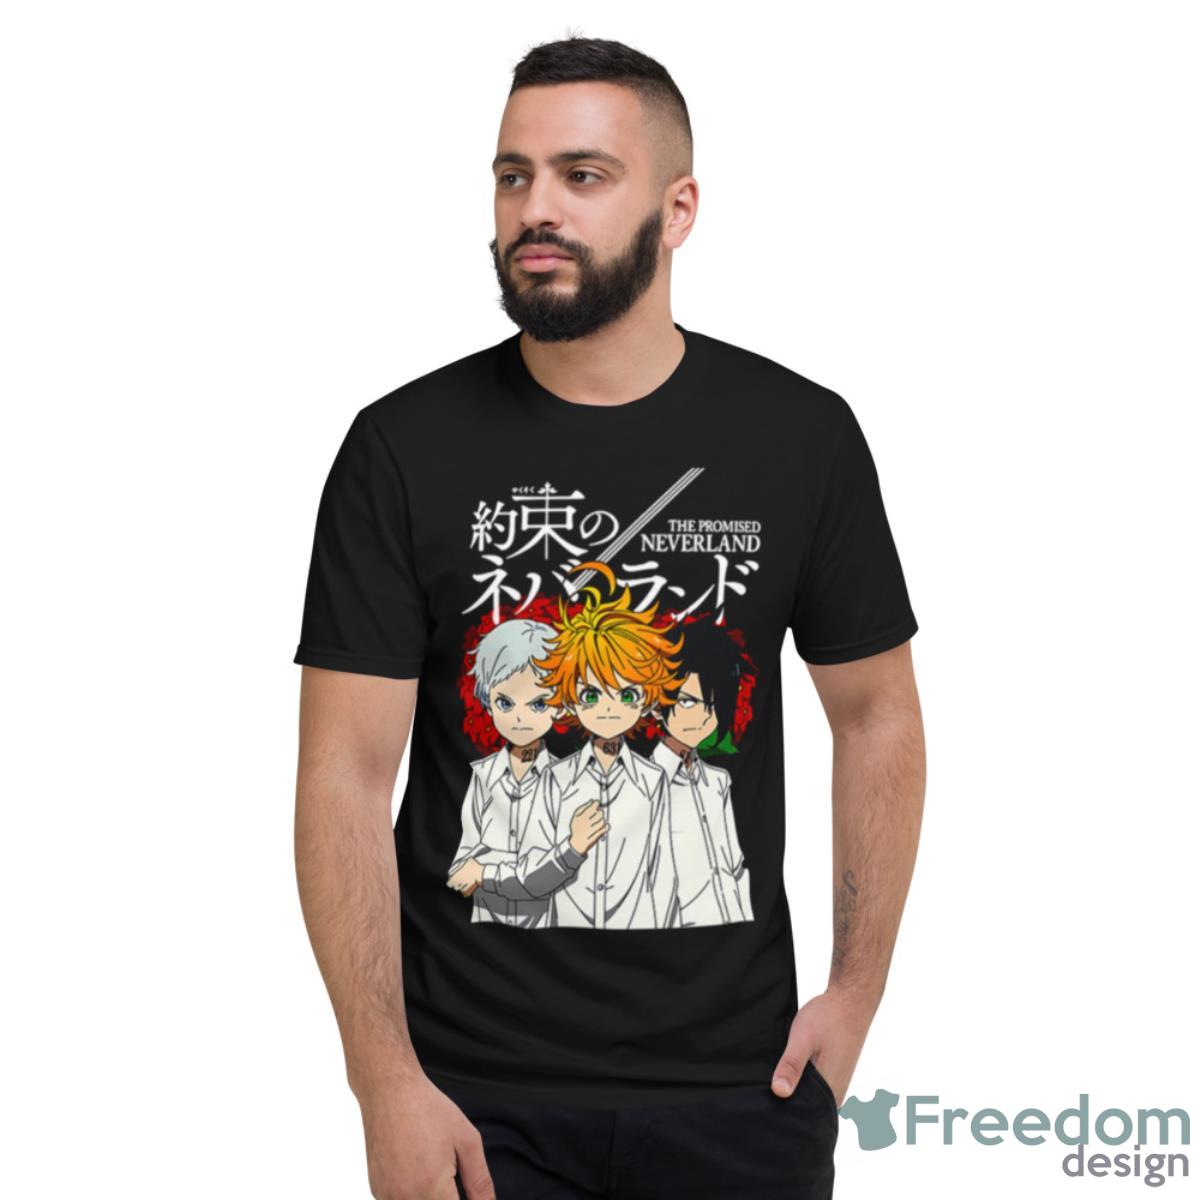 The Brightest Kids The Promised Neverland shirt